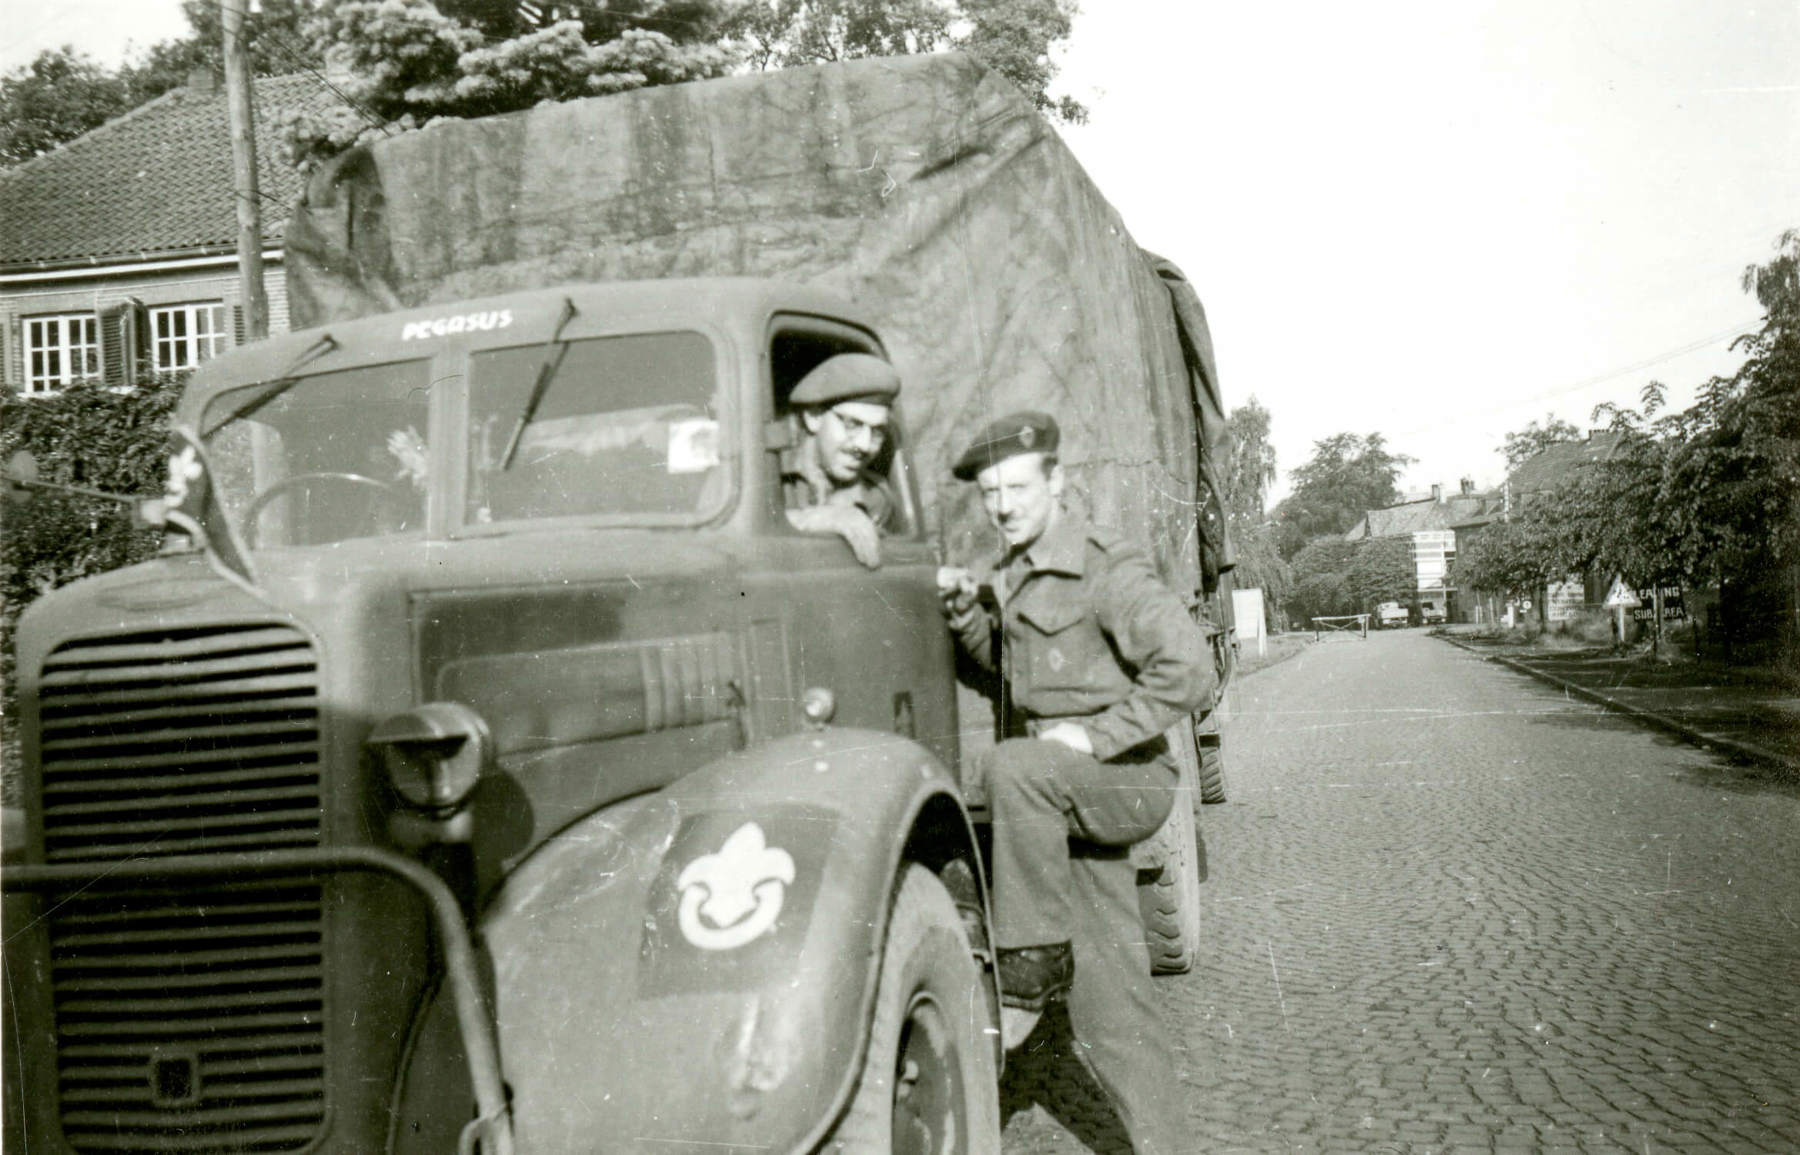 Black and white photo of two men posing next to an Army truck featuring the Scouts emblem